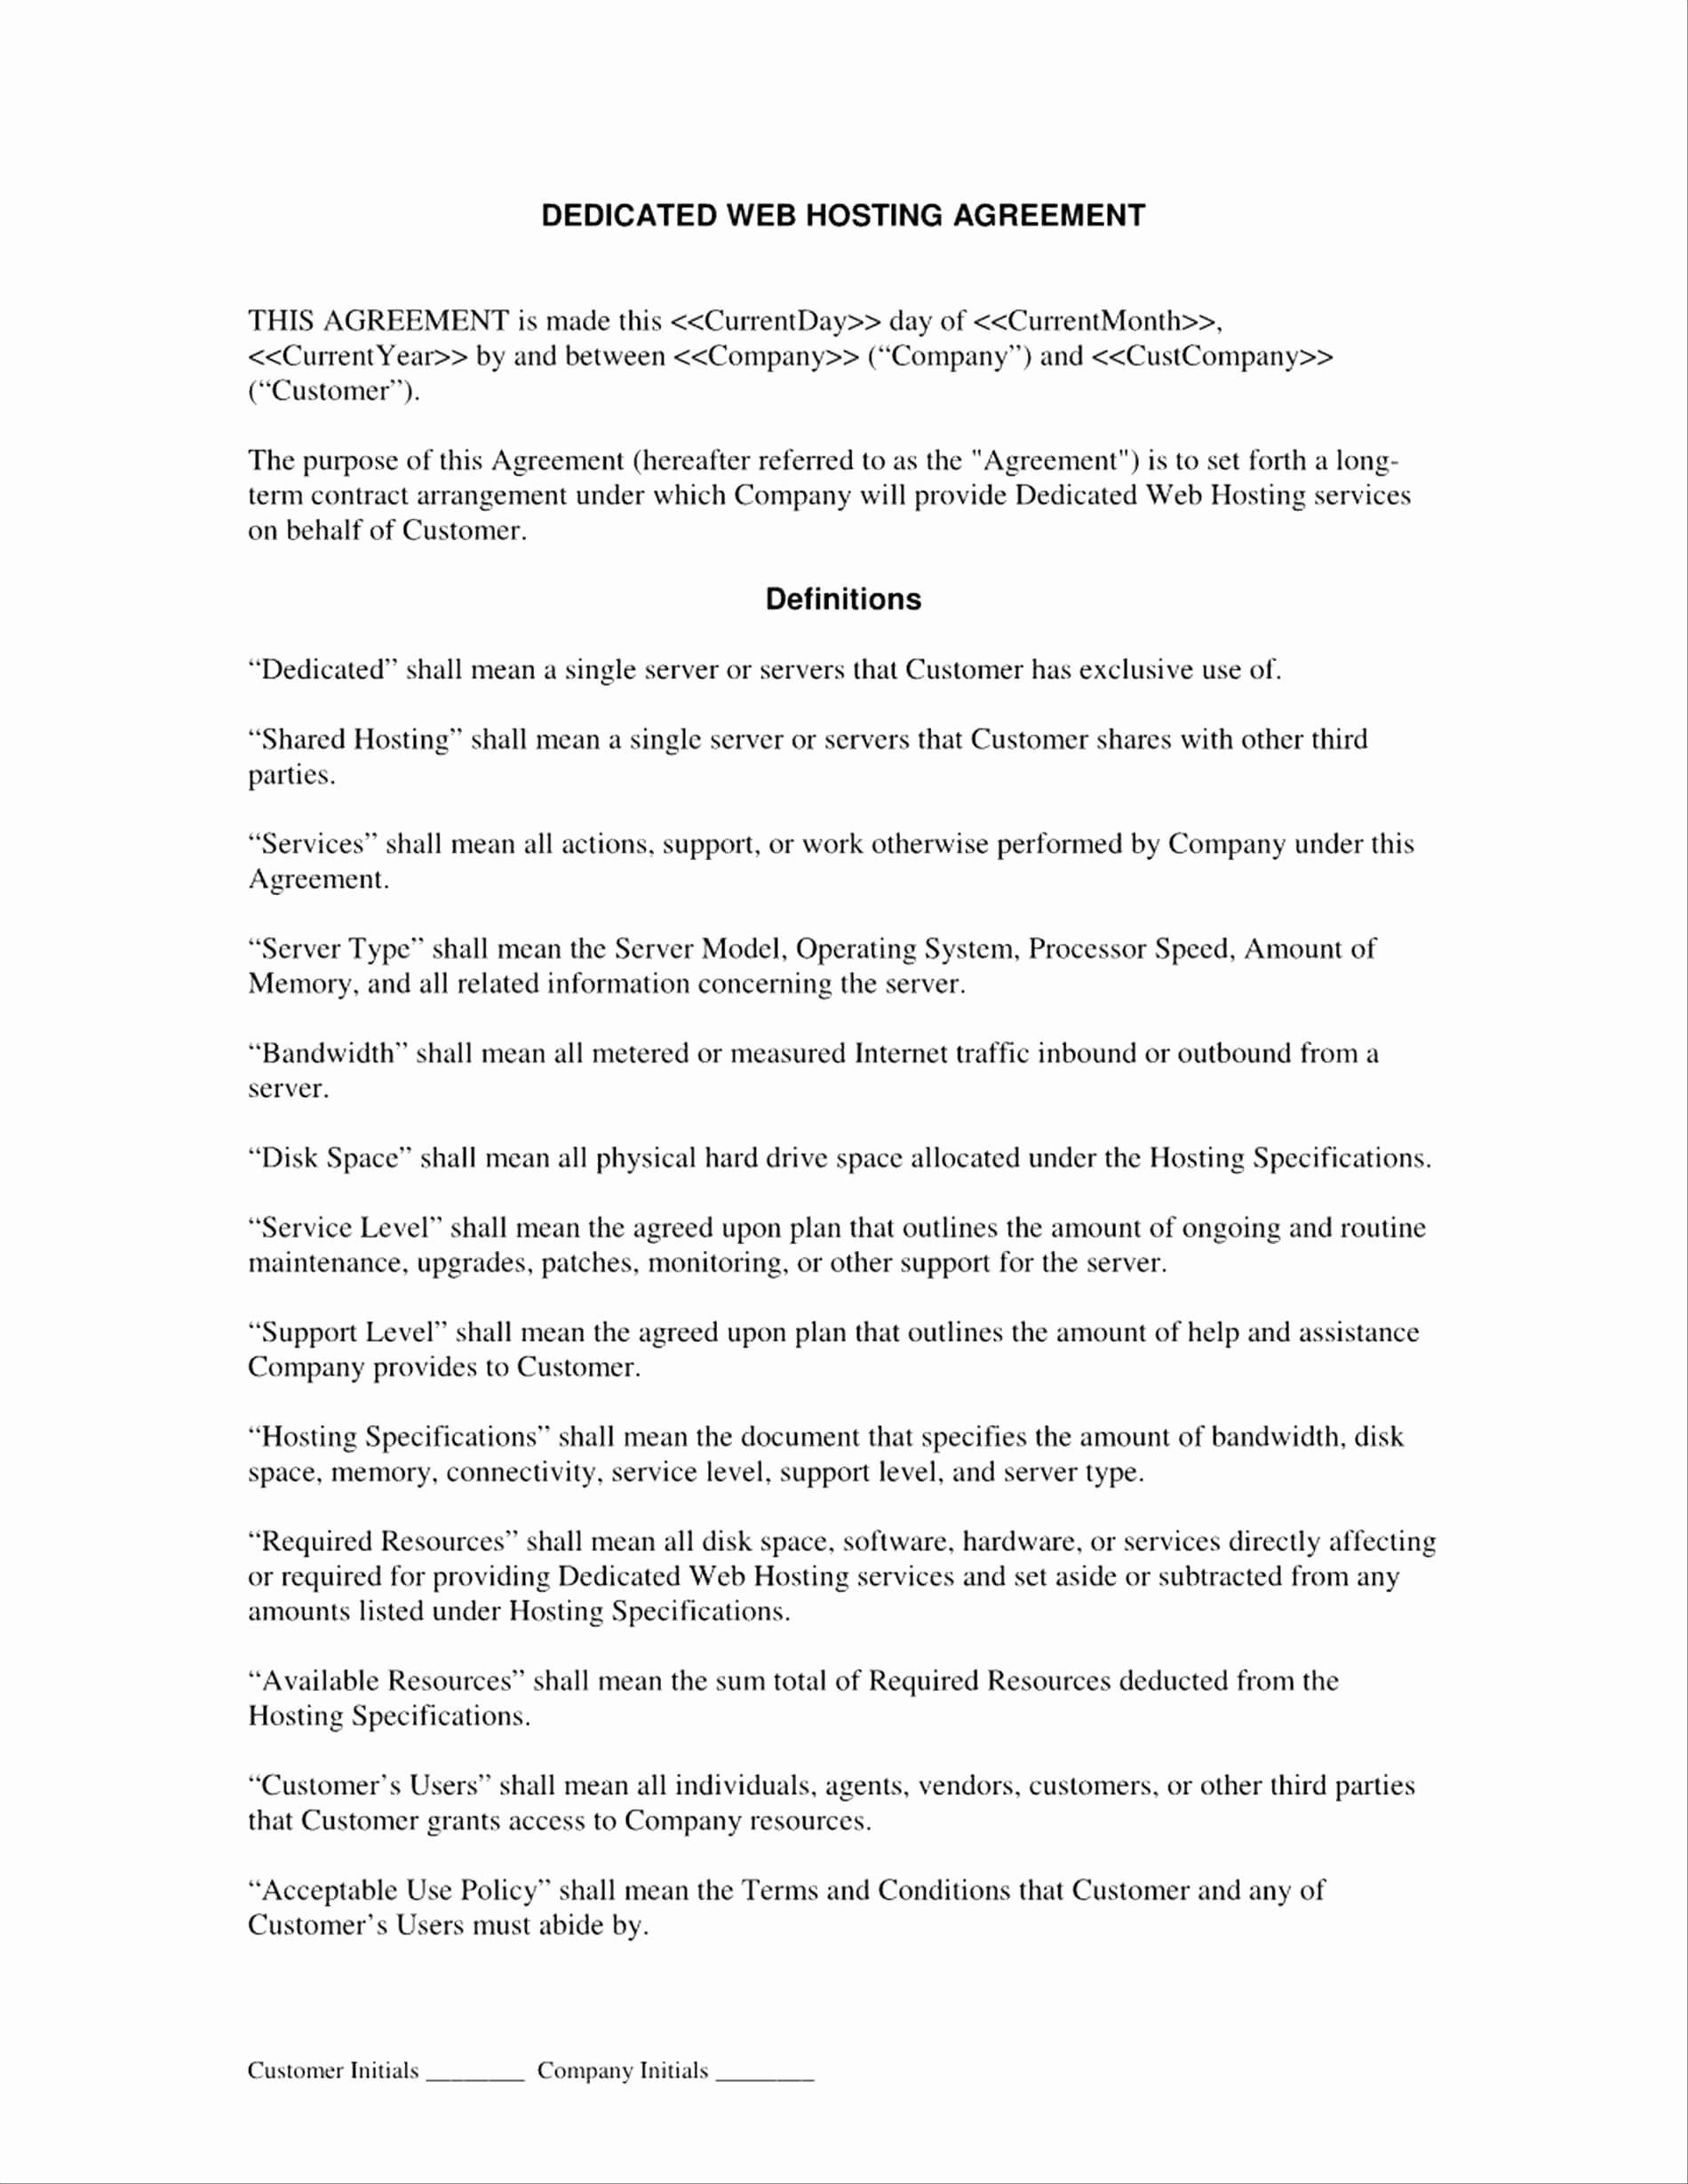 Web Hosting Agreement Template Awesome Contract Document